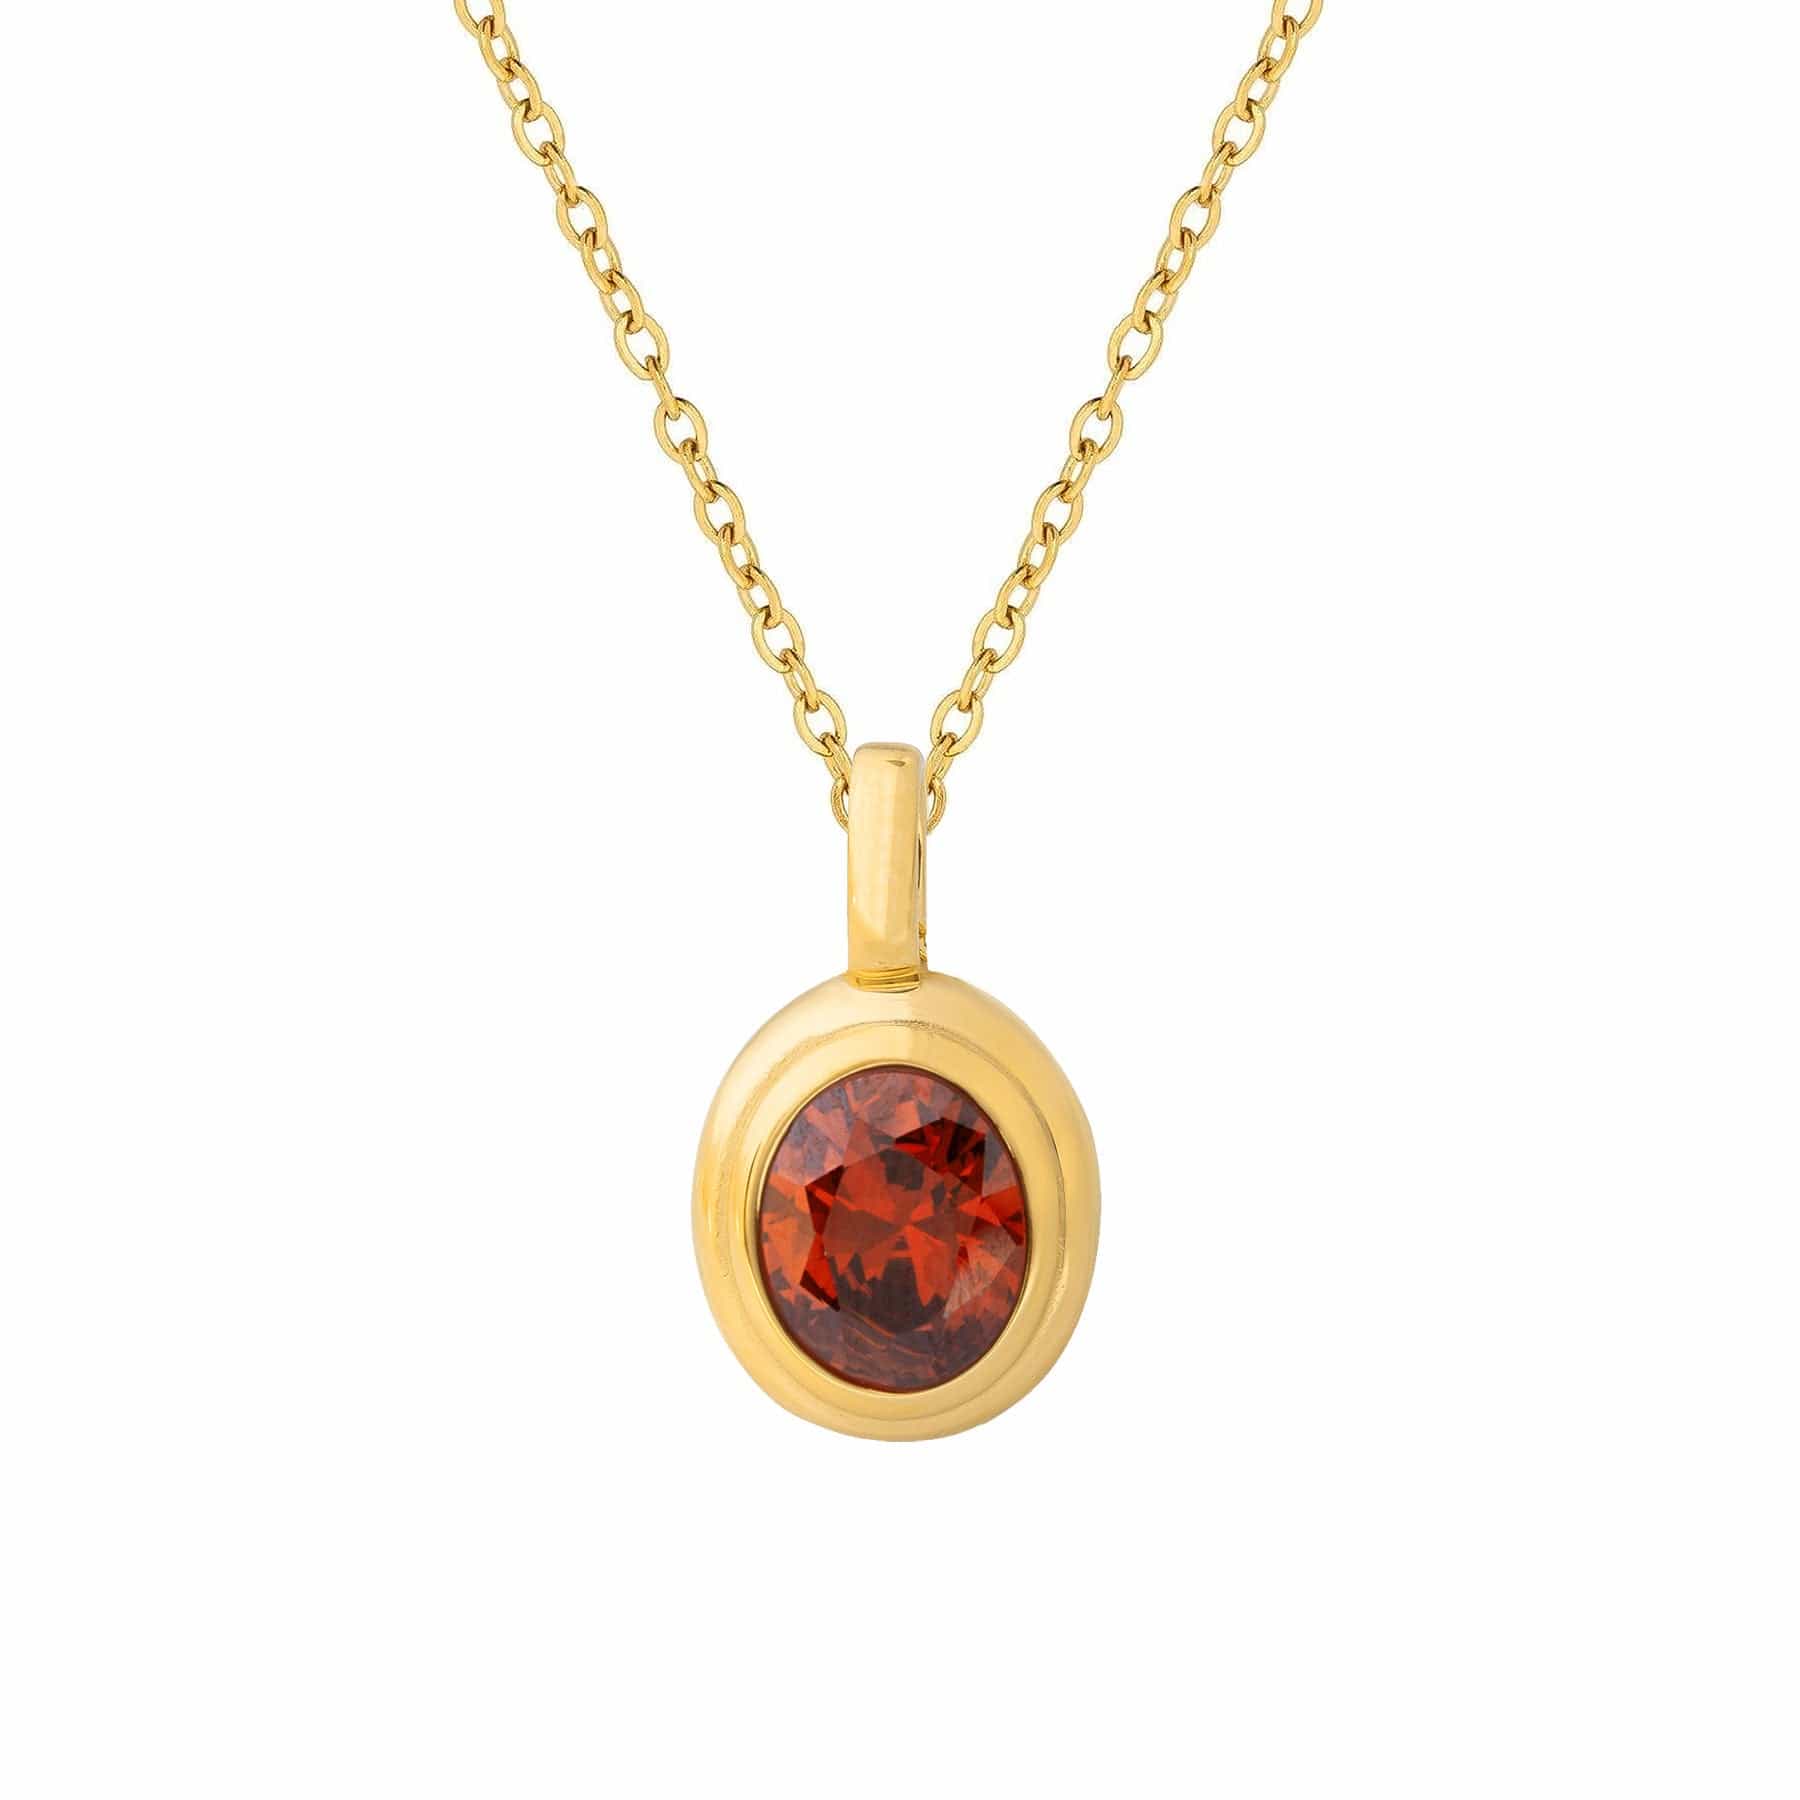 BohoMoon Stainless Steel Sawyer Necklace Gold / Red